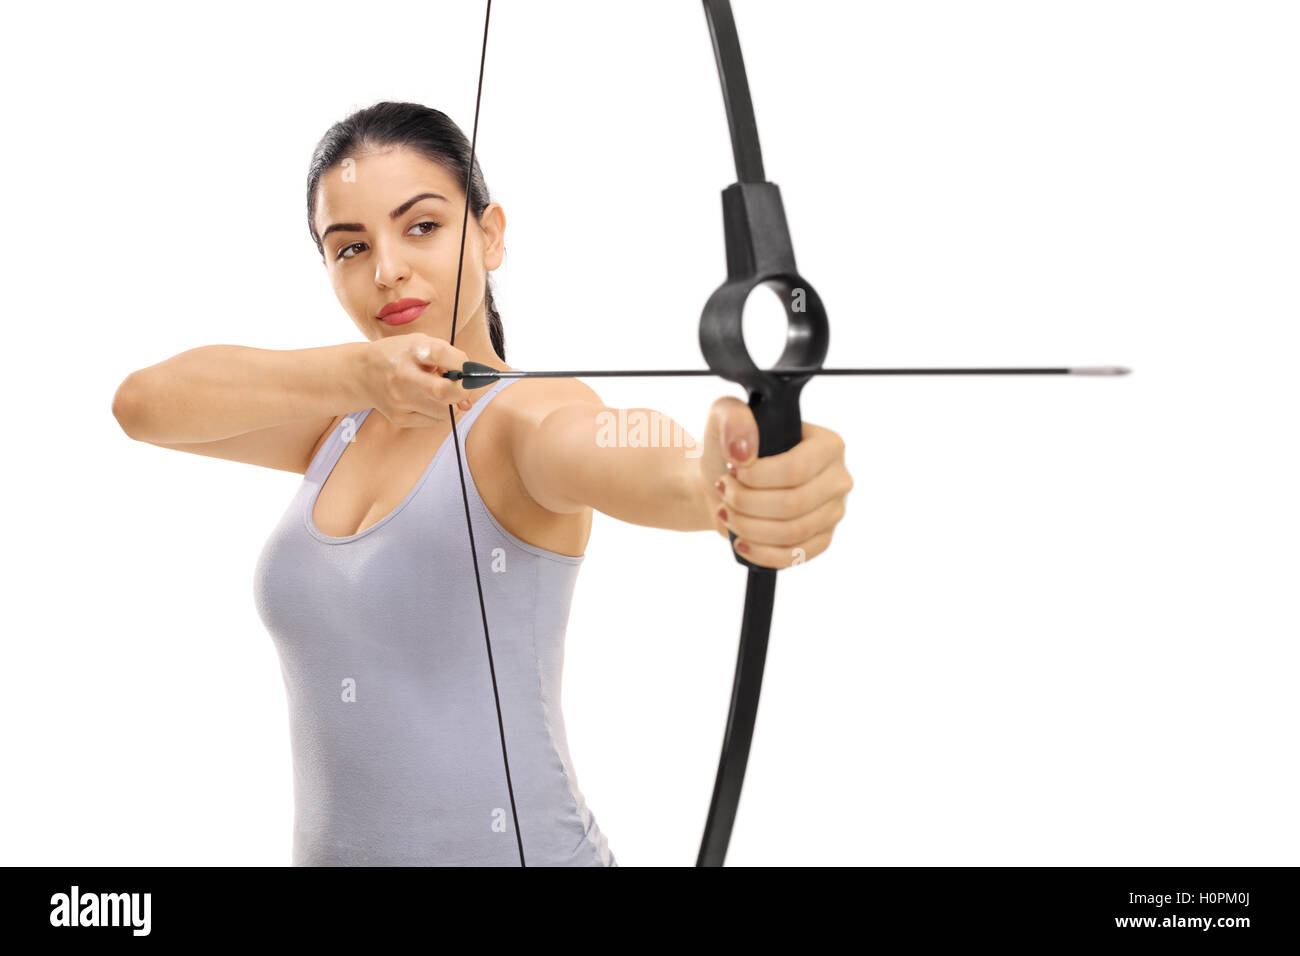 Woman aiming with a bow and arrow isolated on white background Stock Photo